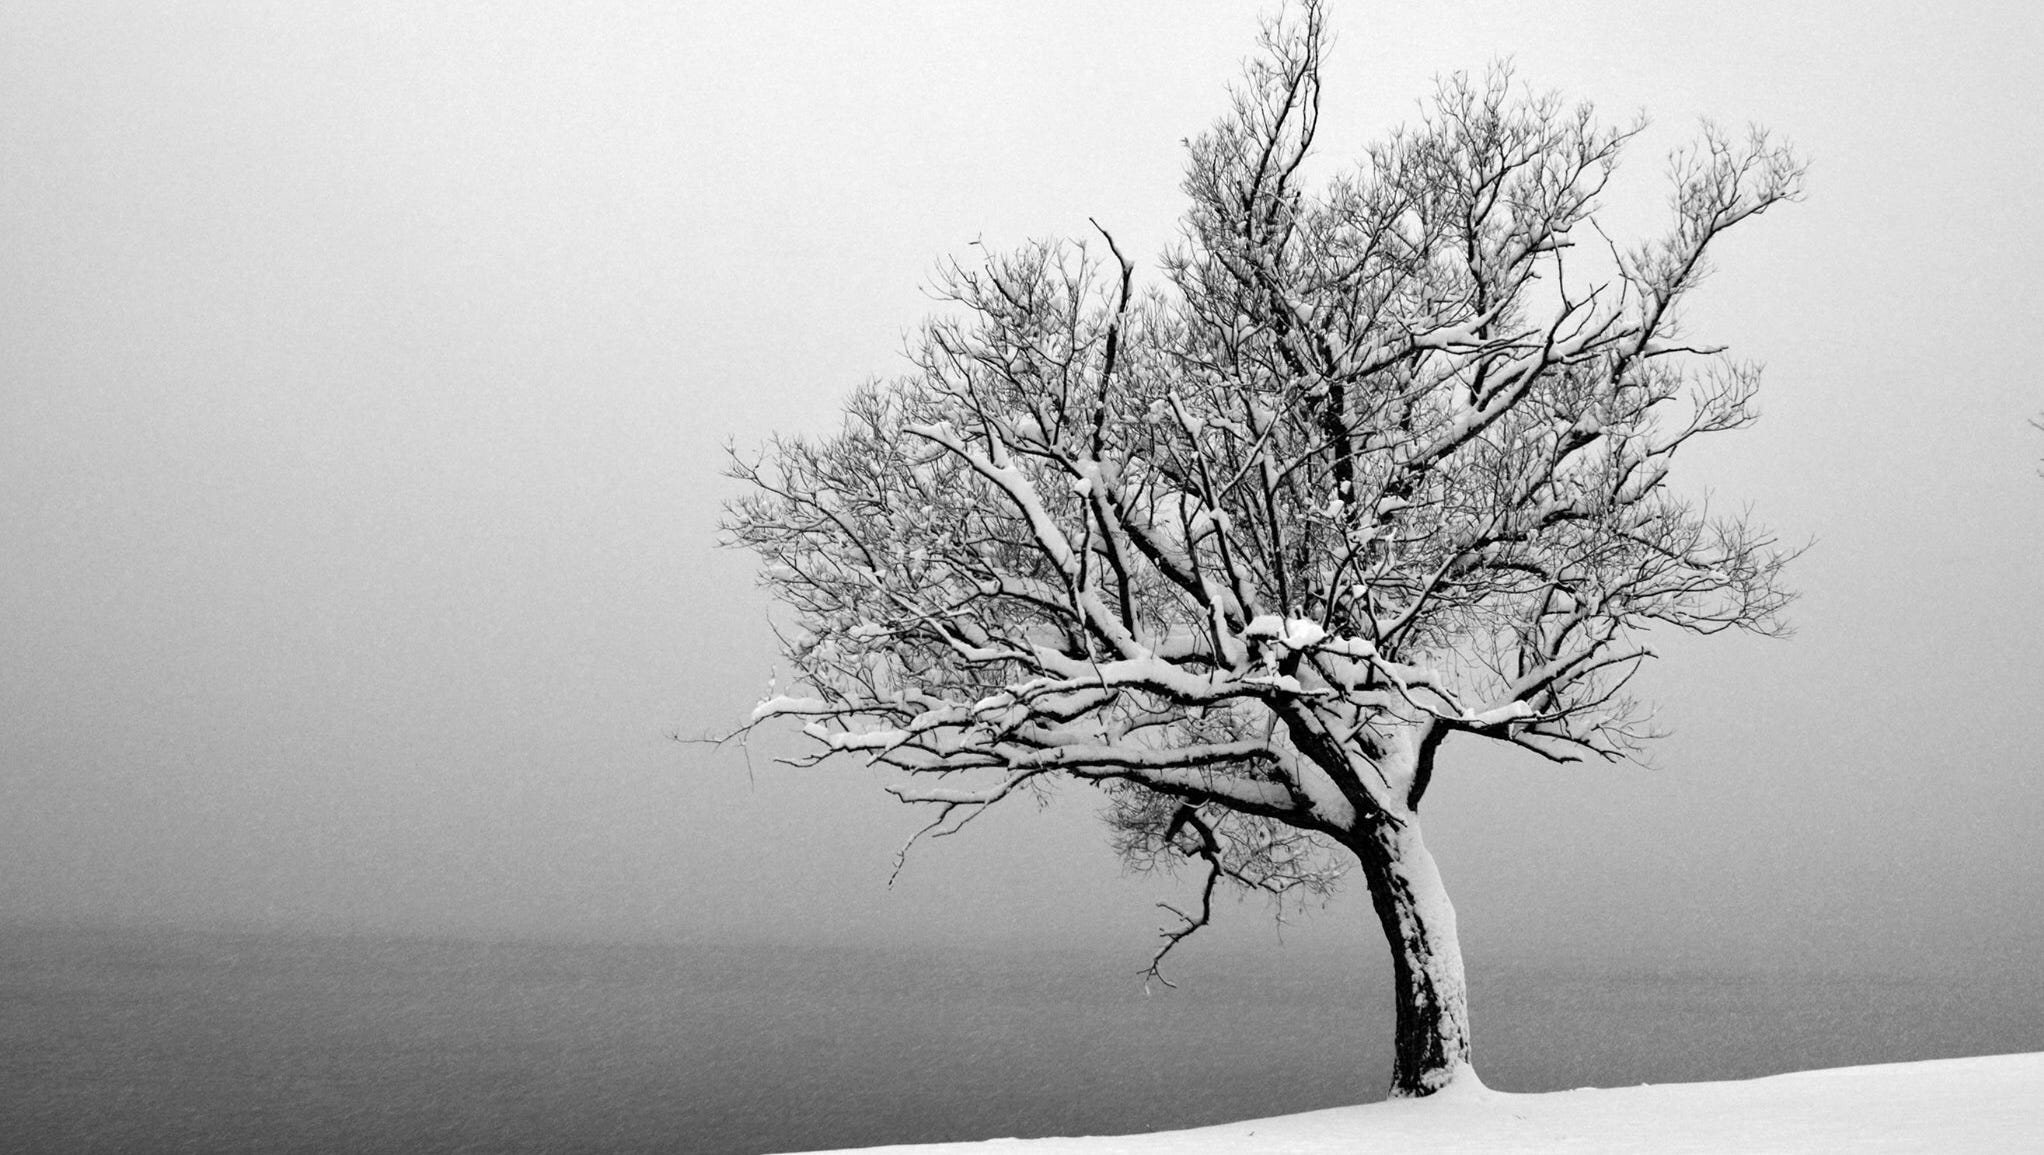 Mike Head of Commerce Township, took “Winter is Coming? No, winter is here” on that November Saturday last year when we had a surprise snowstorm. "Because the temperature was hovering around 32 degrees, a fog layer obscured most of the lake. Even though the image is in black and white, the actual scene had nearly the same color palette."